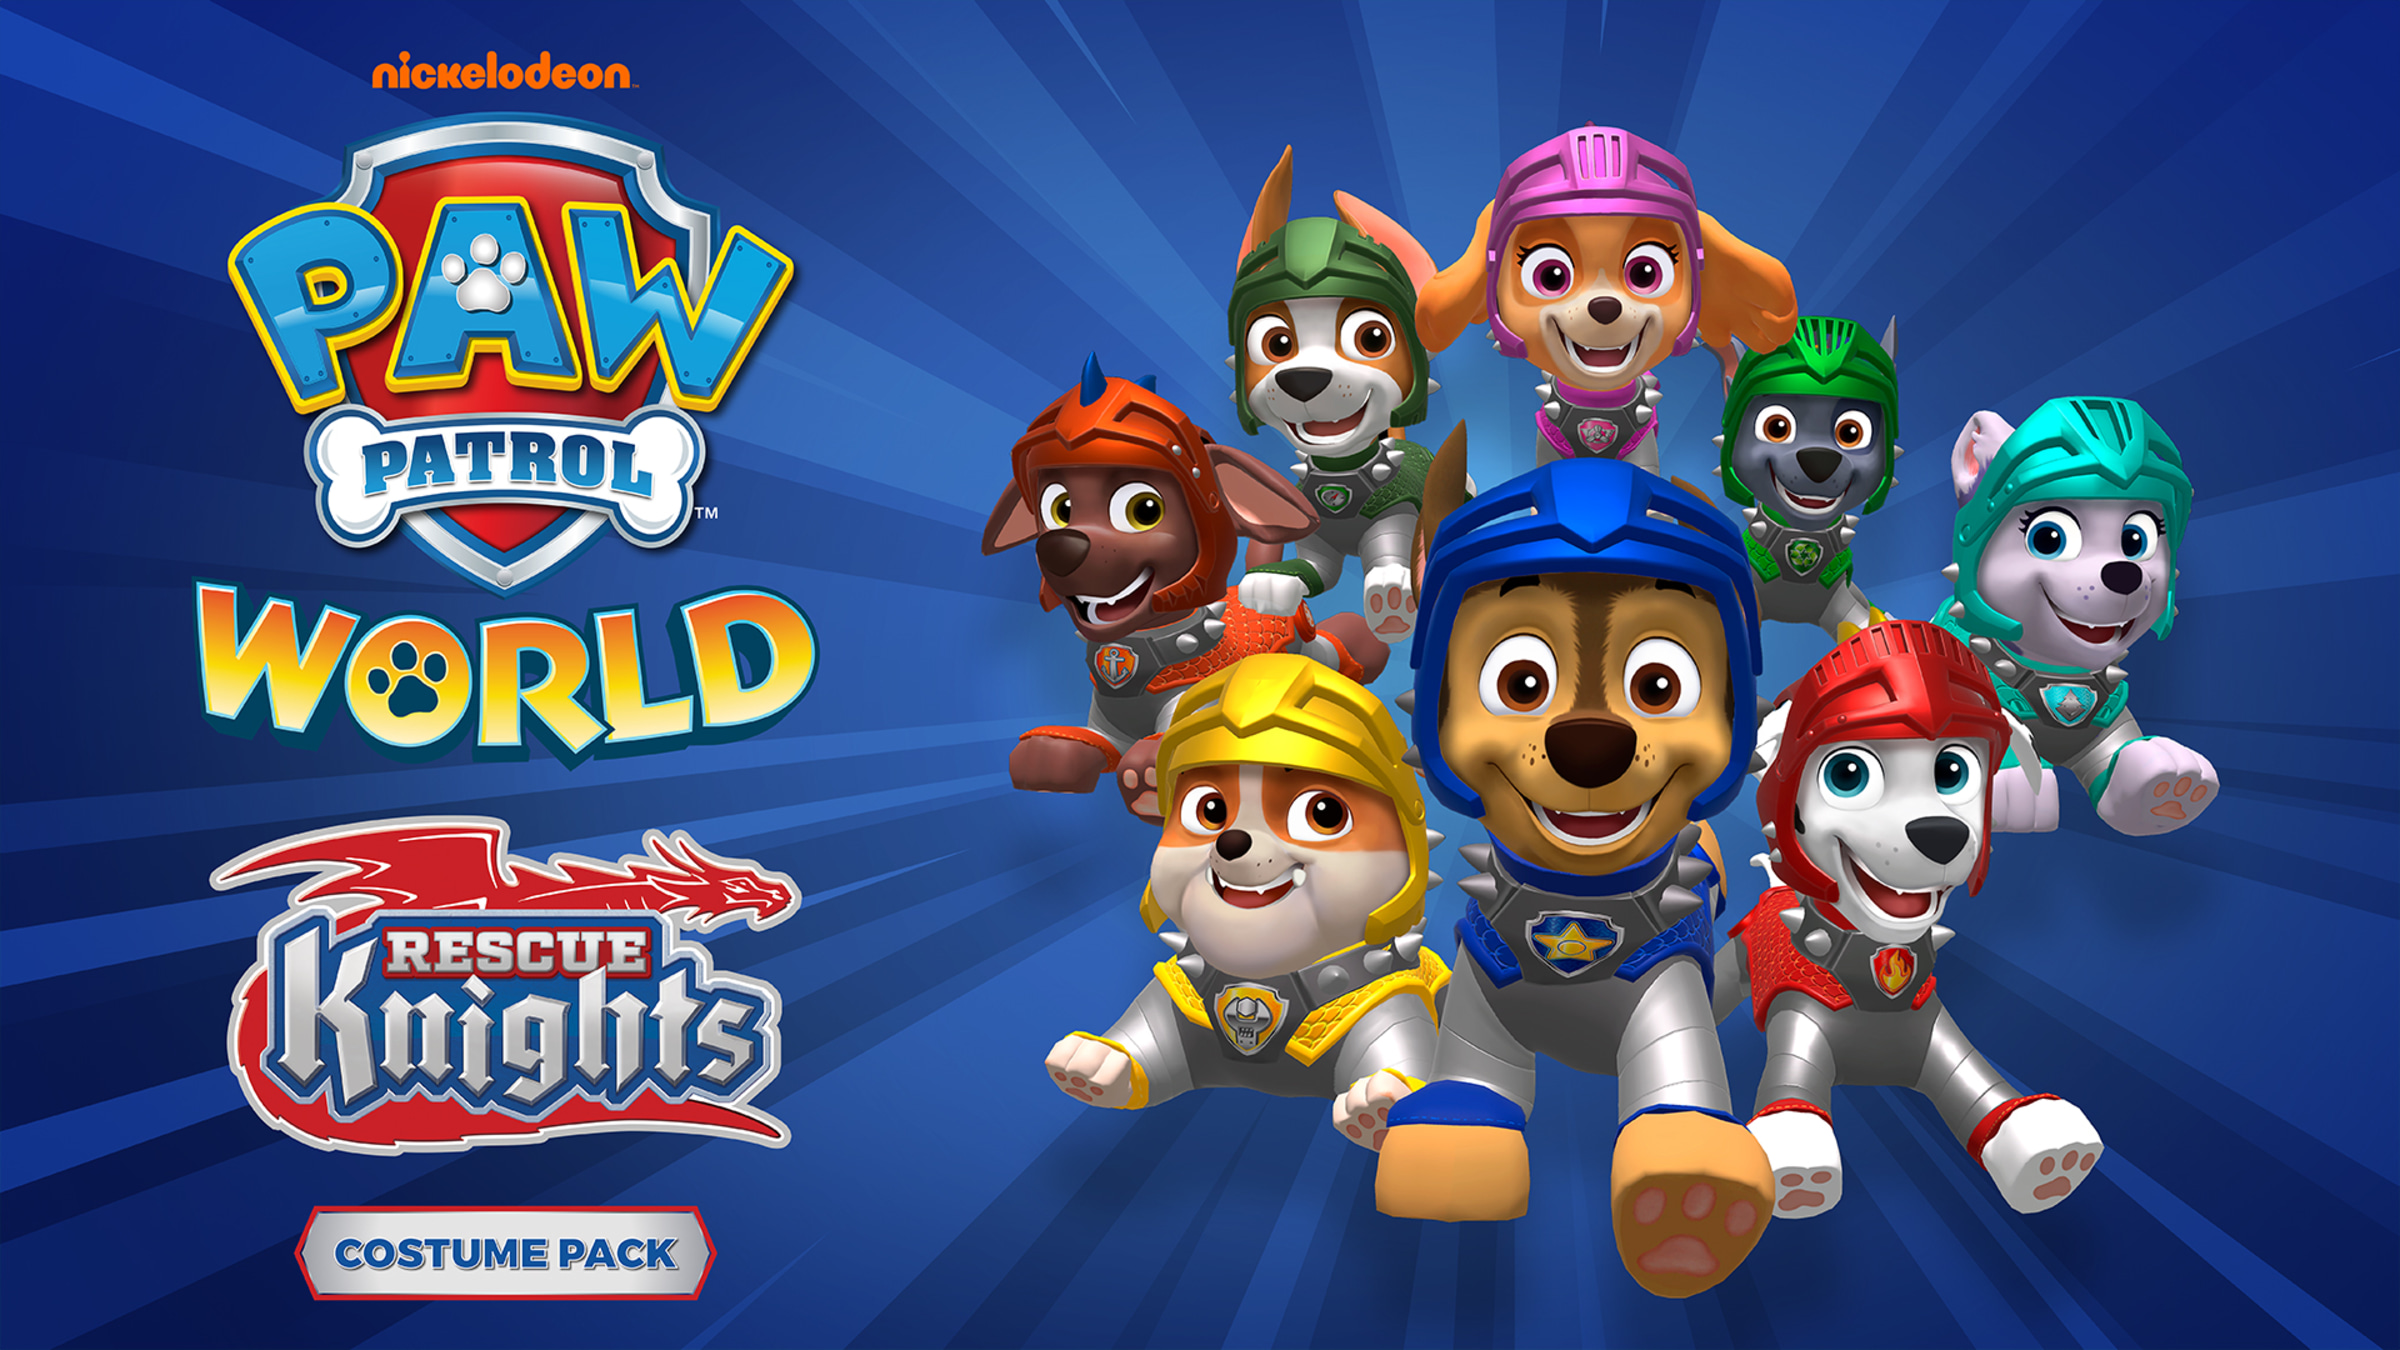 PAW Patrol World - Rescue Knights - Costume Pack for Nintendo Switch -  Nintendo Official Site